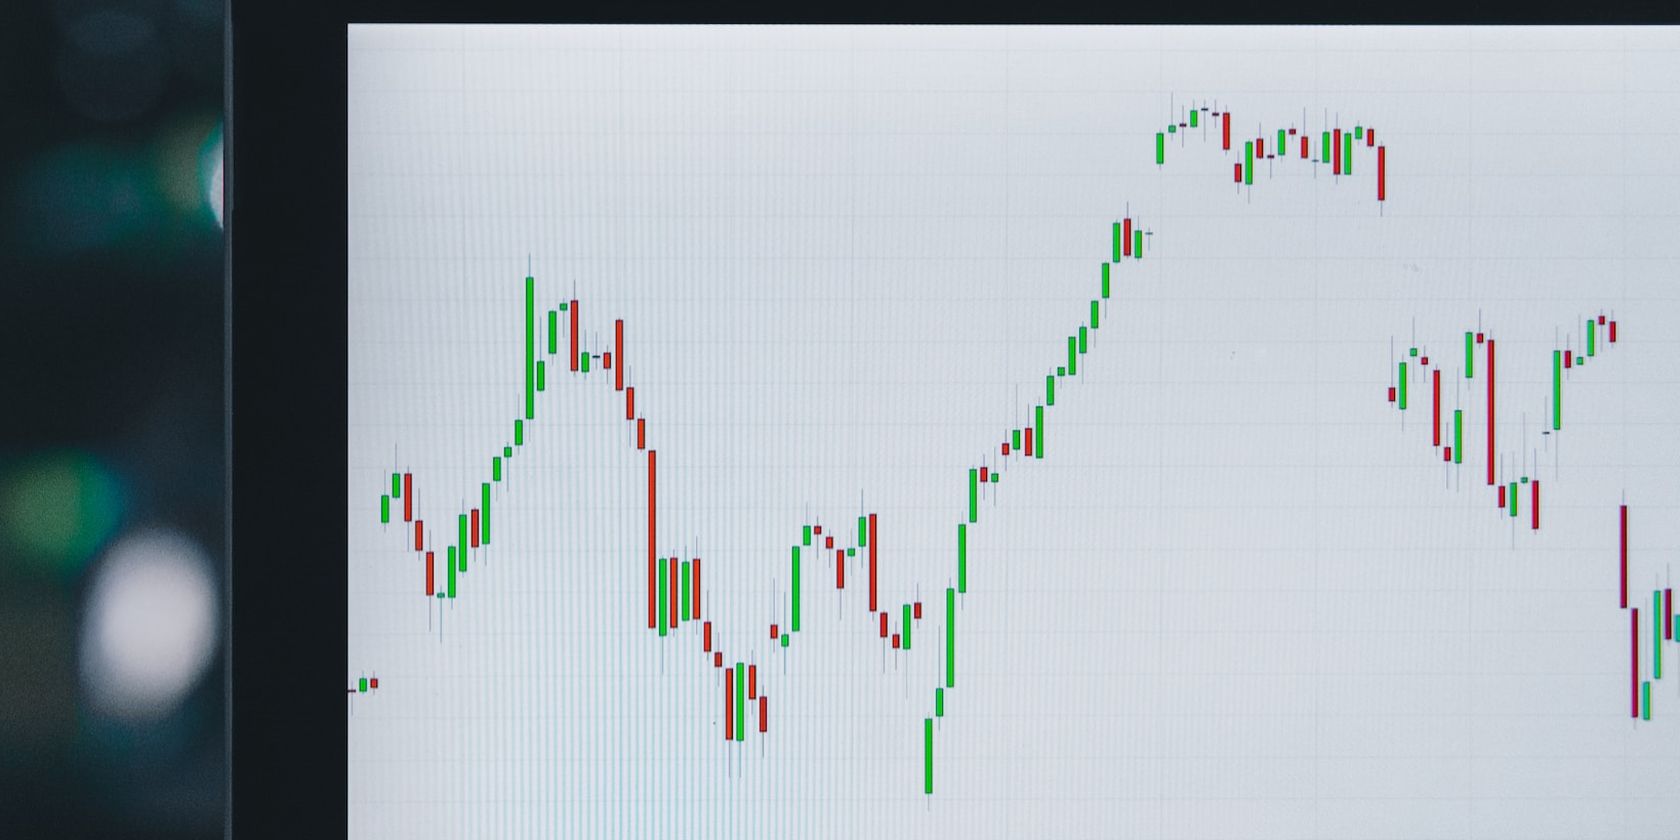 What Is the Head and Shoulders Pattern in Crypto Trading?